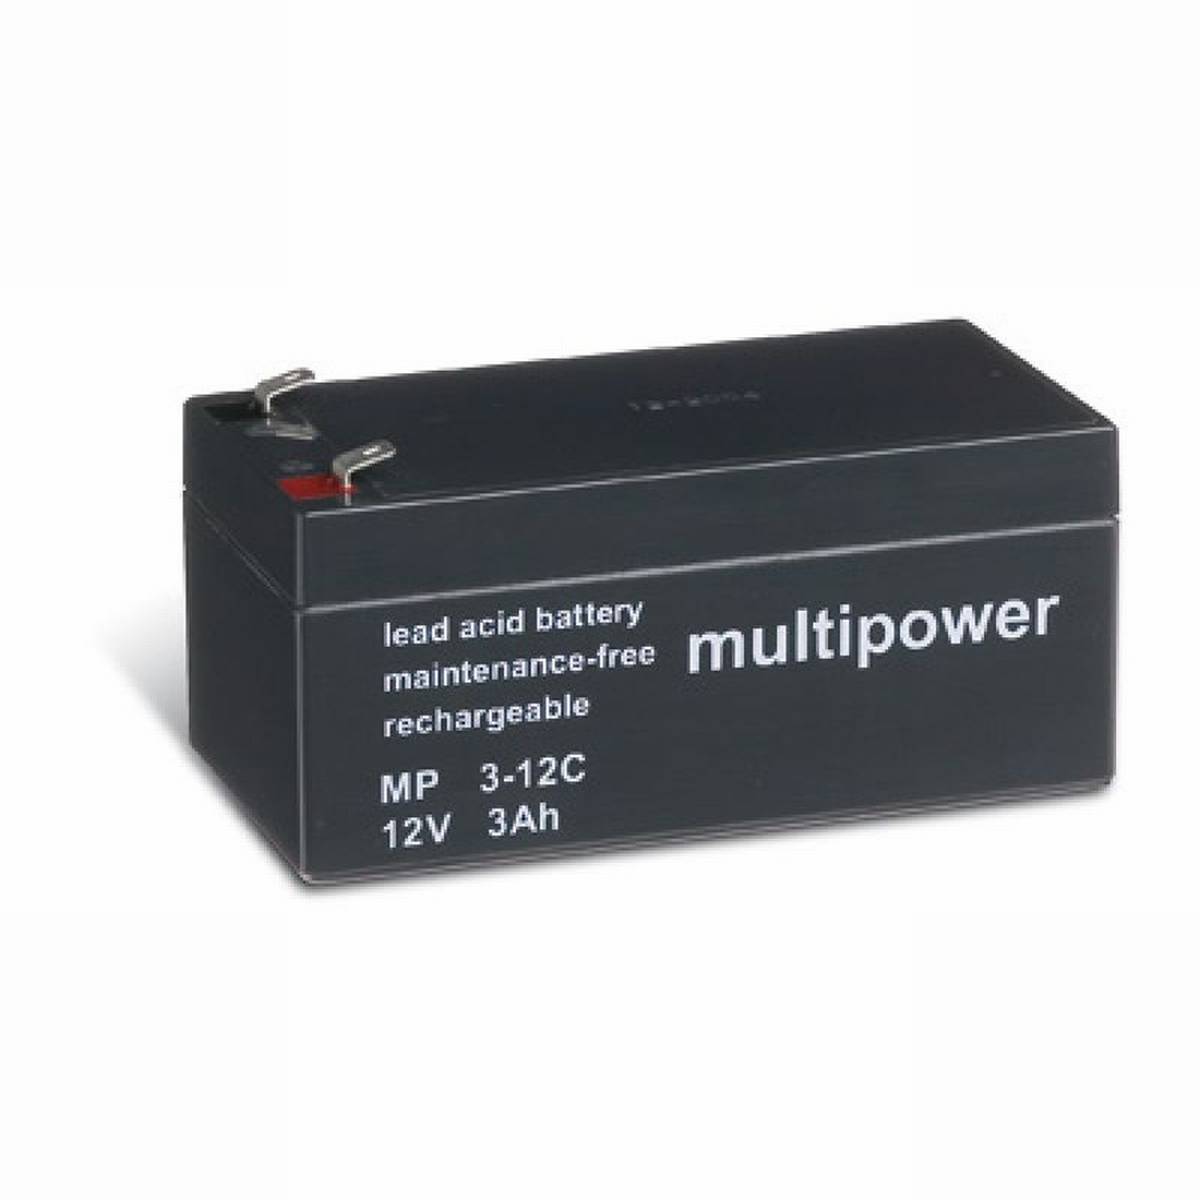 Multipower MP3-12C 12V 3Ah Piombo Batteria Tipo Ciclo